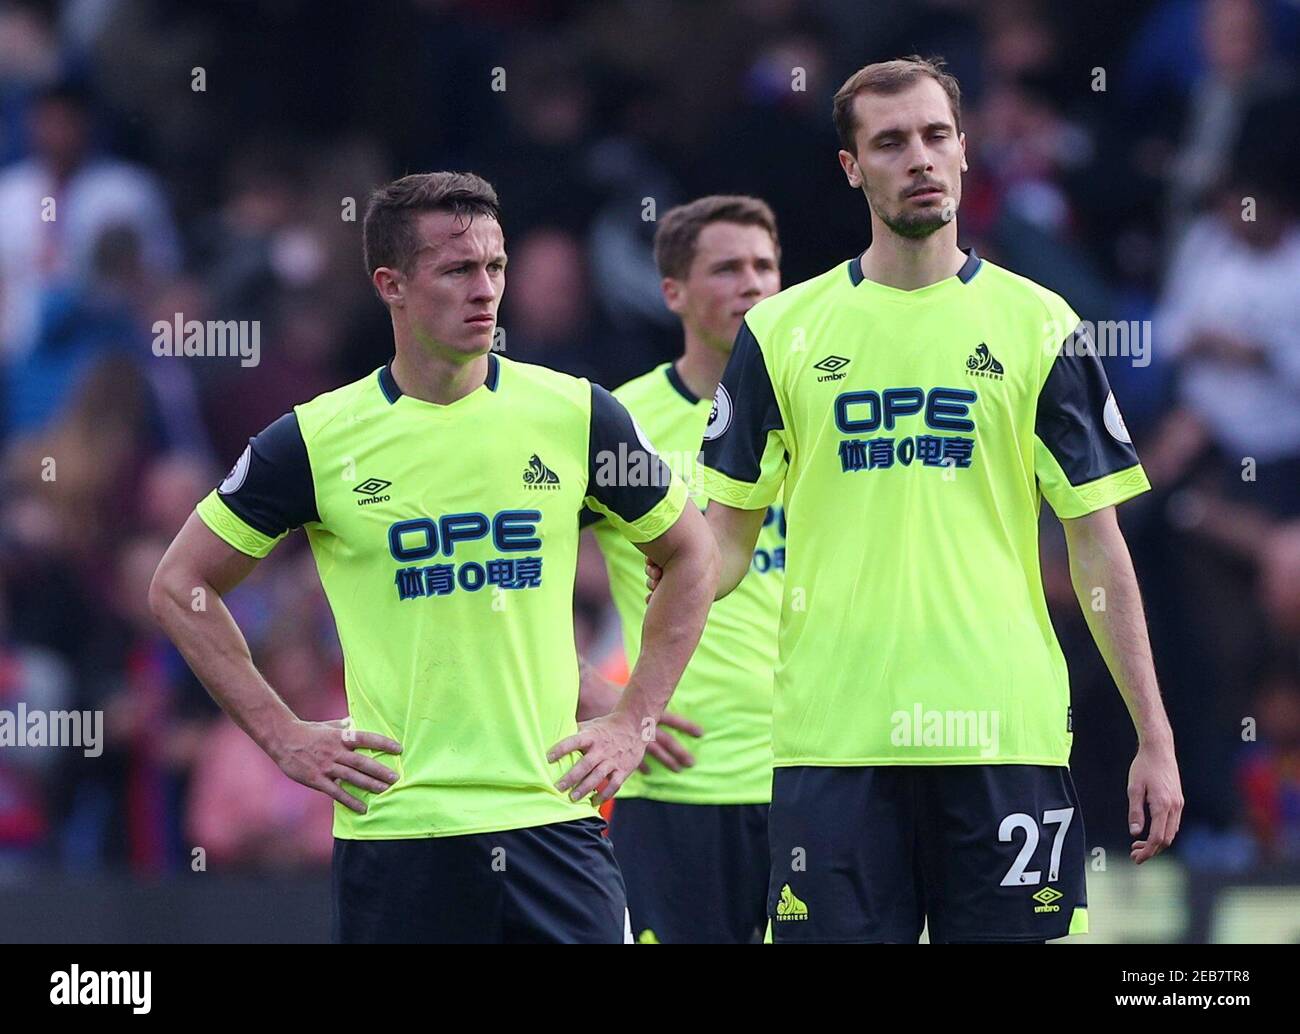 Soccer Football - Premier League - Crystal Palace v Huddersfield Town - Selhurst Park, London, Britain - March 30, 2019  Huddersfield Town's Jon Gorenc Stankovic and team mates look dejected after the match as they are relegated from the Premier League   REUTERS/Hannah McKay  EDITORIAL USE ONLY. No use with unauthorized audio, video, data, fixture lists, club/league logos or "live" services. Online in-match use limited to 75 images, no video emulation. No use in betting, games or single club/league/player publications.  Please contact your account representative for further details. Stock Photo